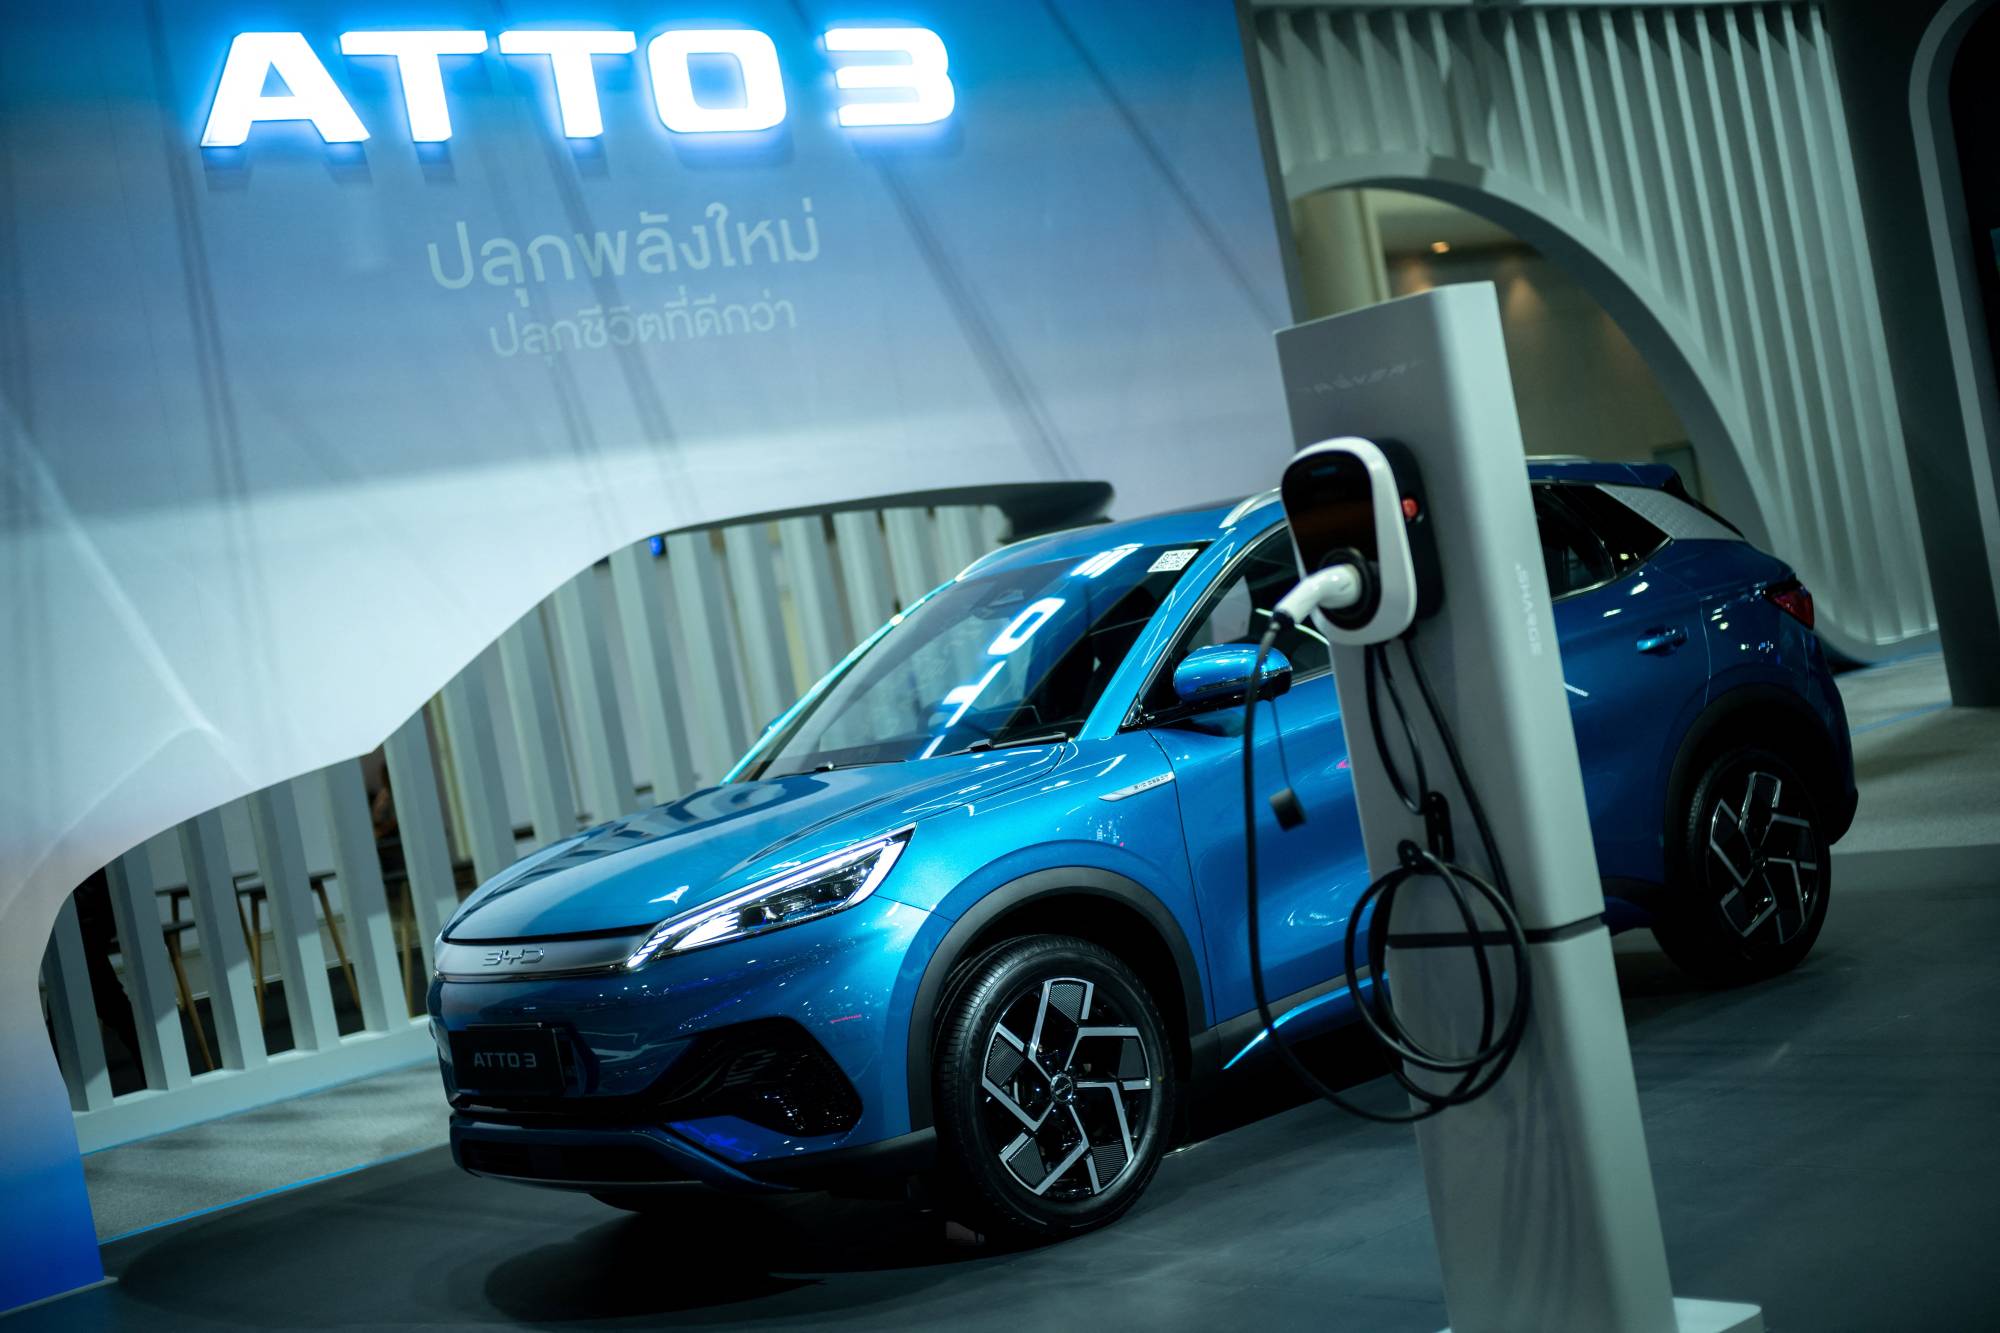 The BYD Atto 3 EV car is displayed at the 39 Thailand International Motor Expo in Bangkok on Nov. 30. | REUTERS